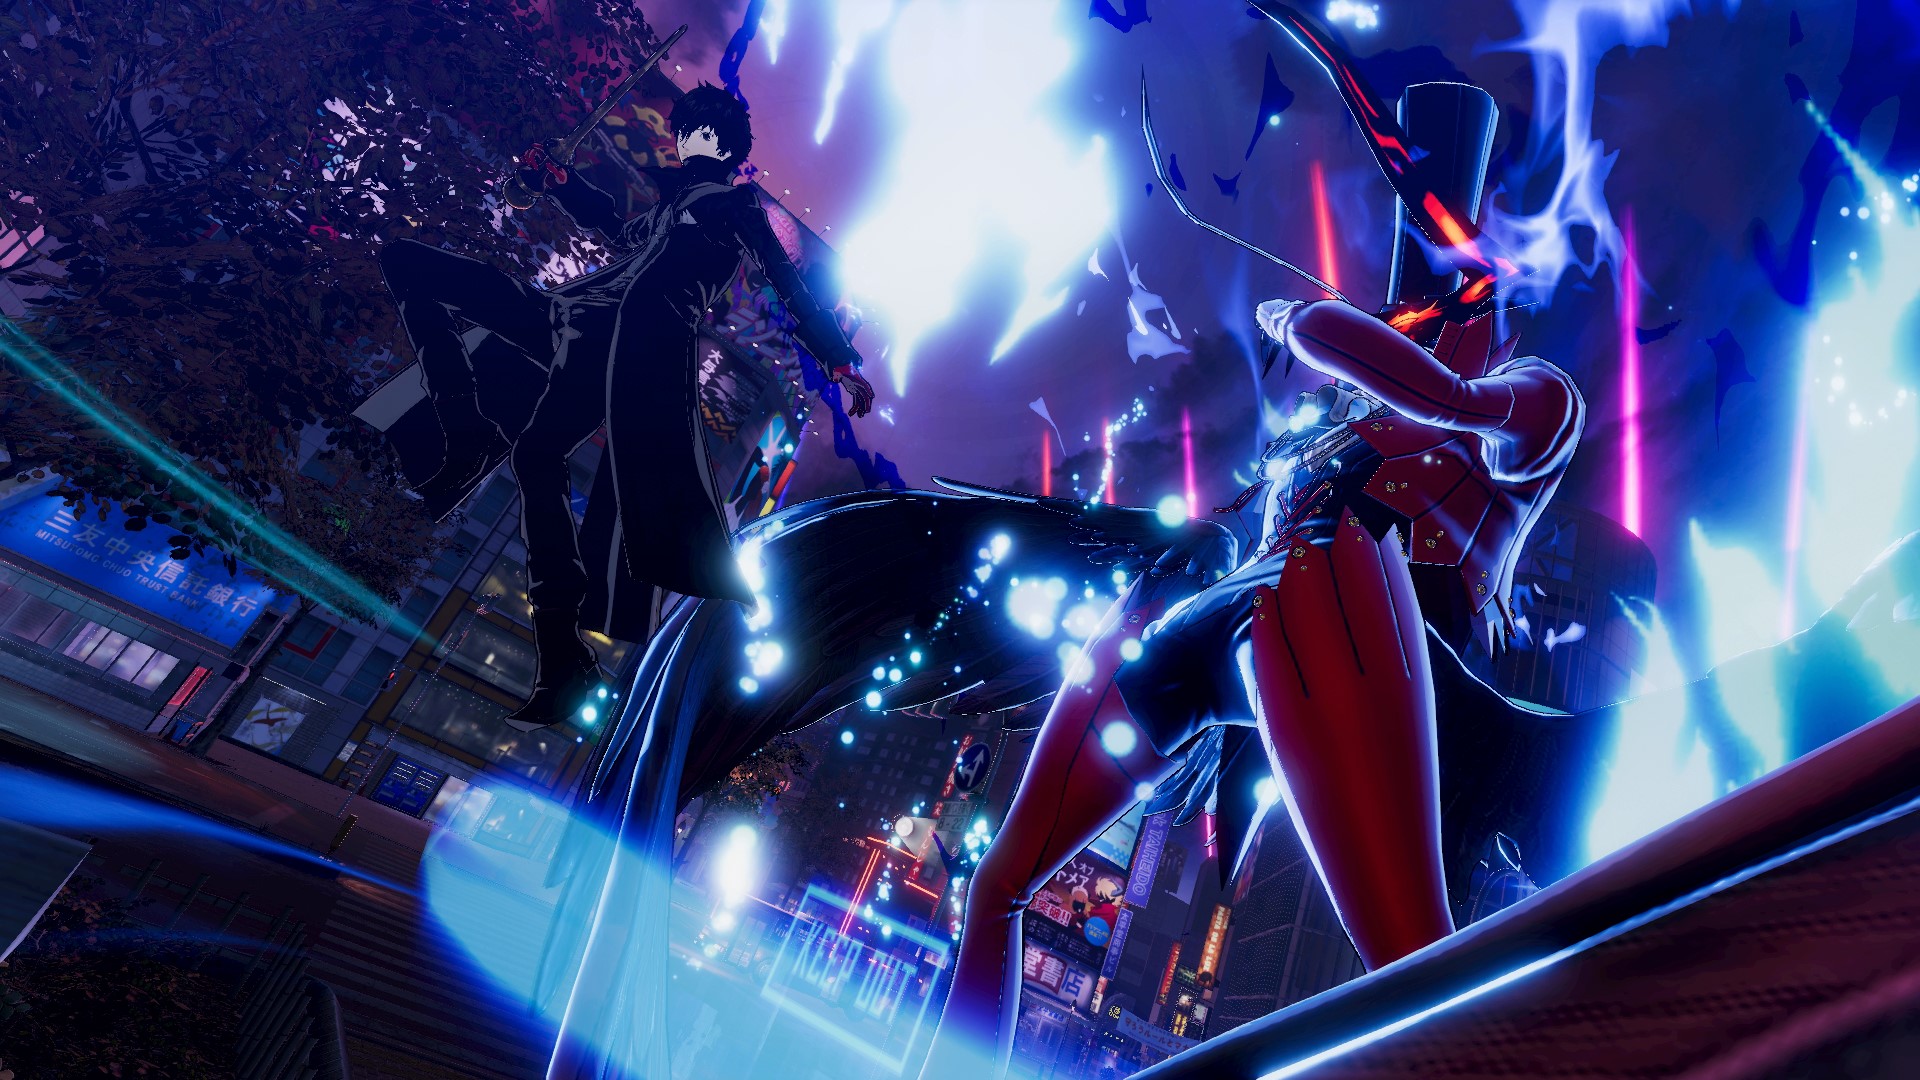 Persona 5 Strikers Review: Missing the Spark